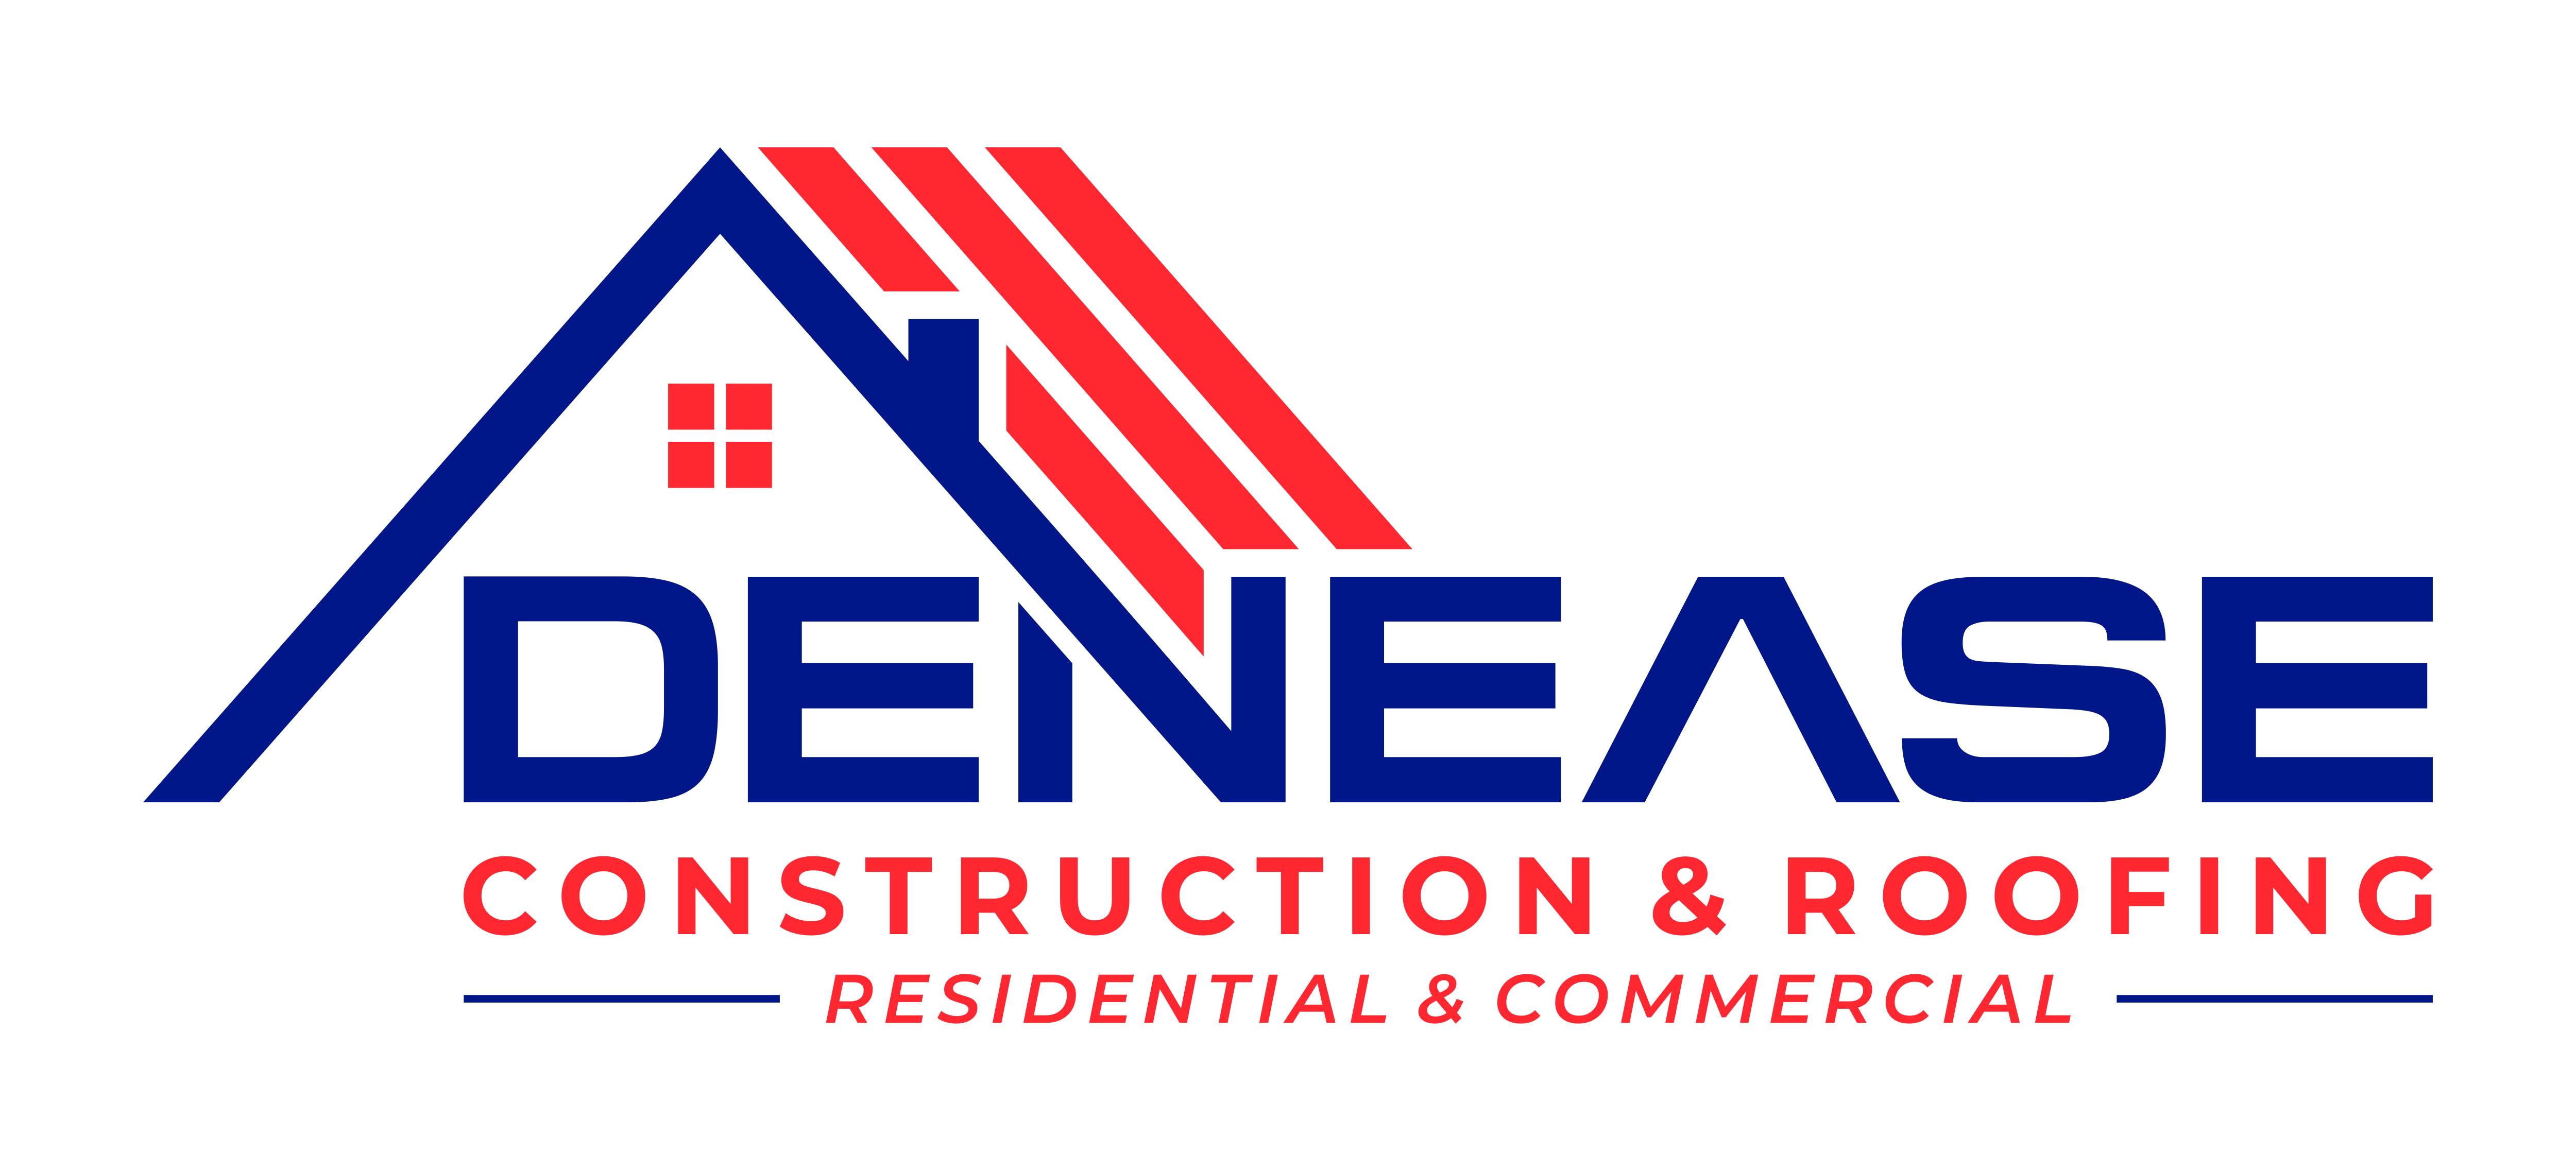 DENEASE Construction & Roofing 1